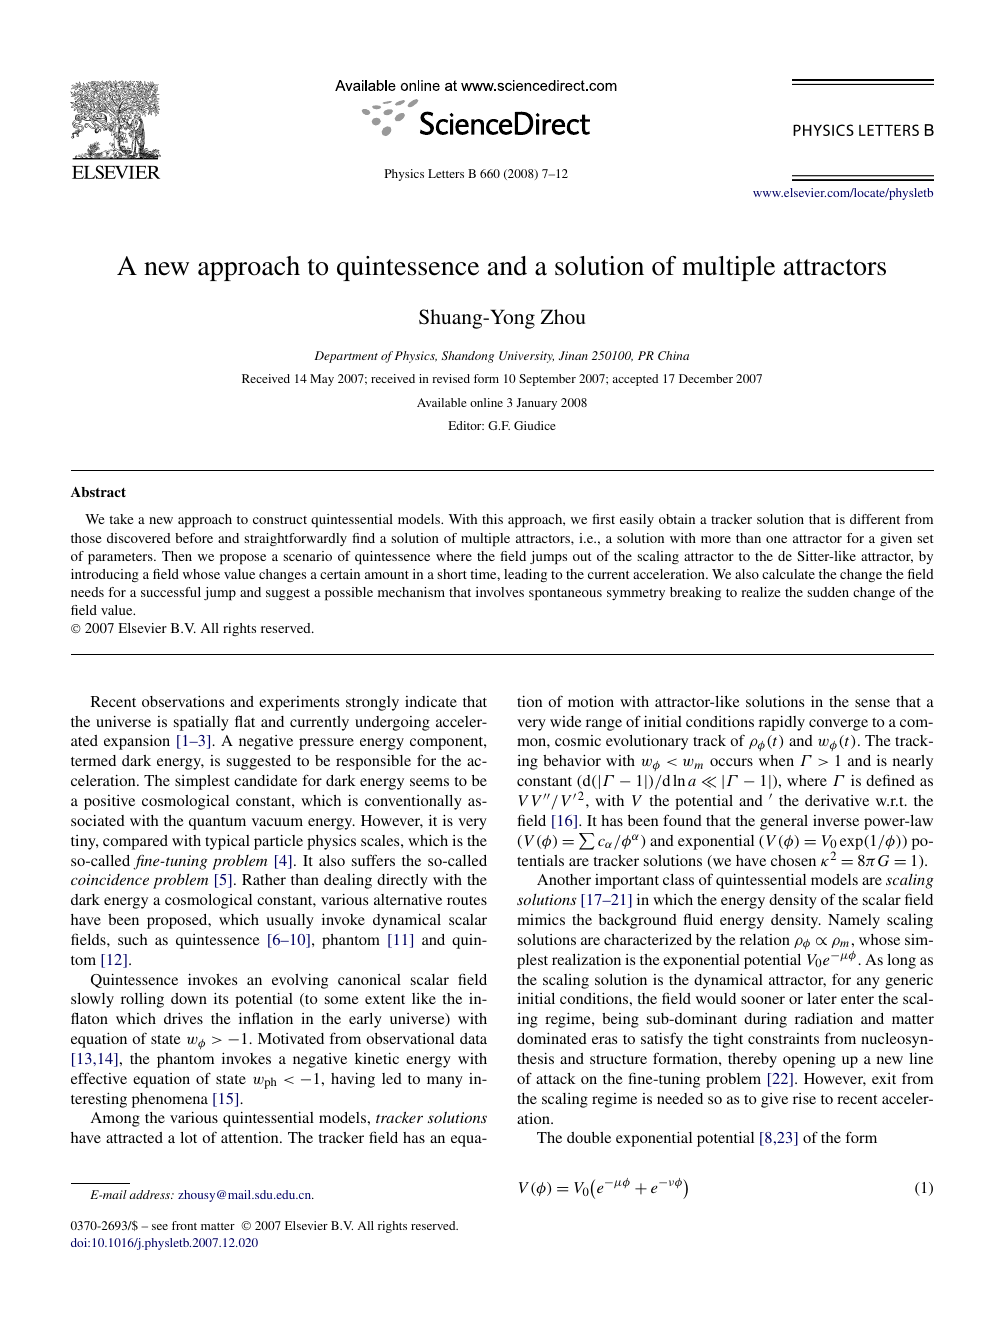 A New Approach To Quintessence And A Solution Of Multiple Attractors Topic Of Research Paper In Physical Sciences Download Scholarly Article Pdf And Read For Free On Cyberleninka Open Science Hub